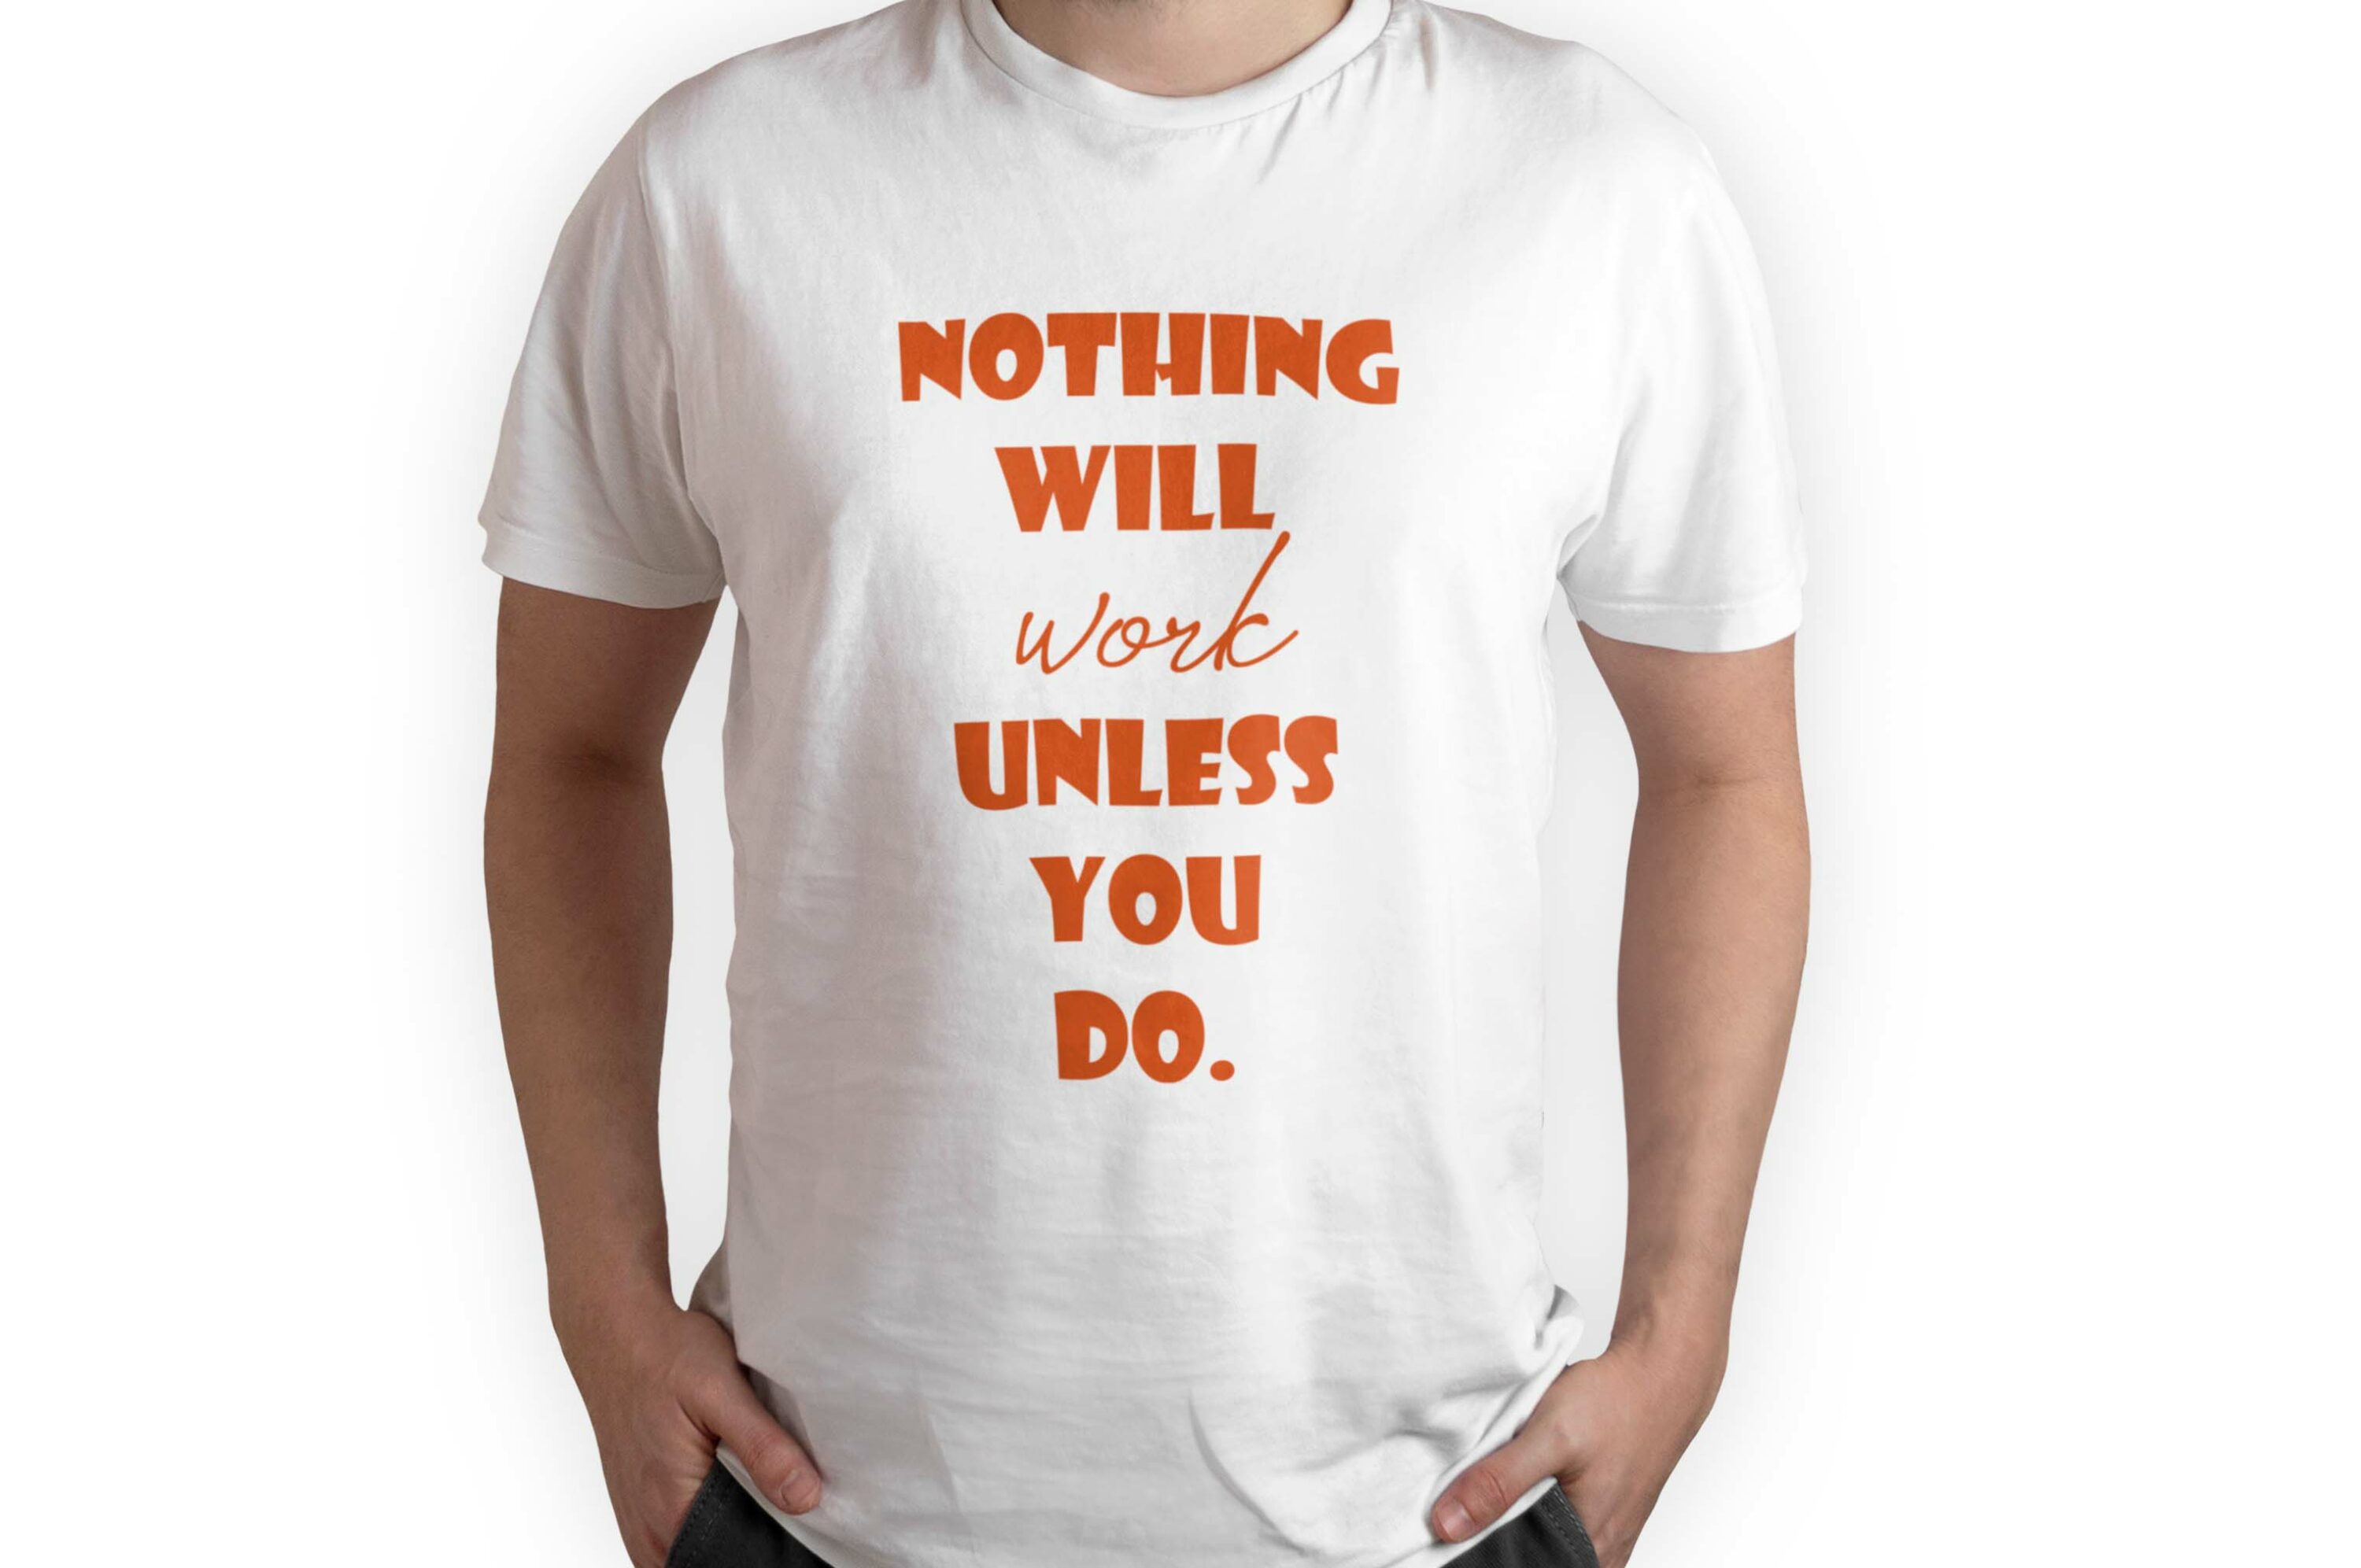 Bundle of 156 T-shirt Designs with Fitness Quotes, nothing will work unless you do.